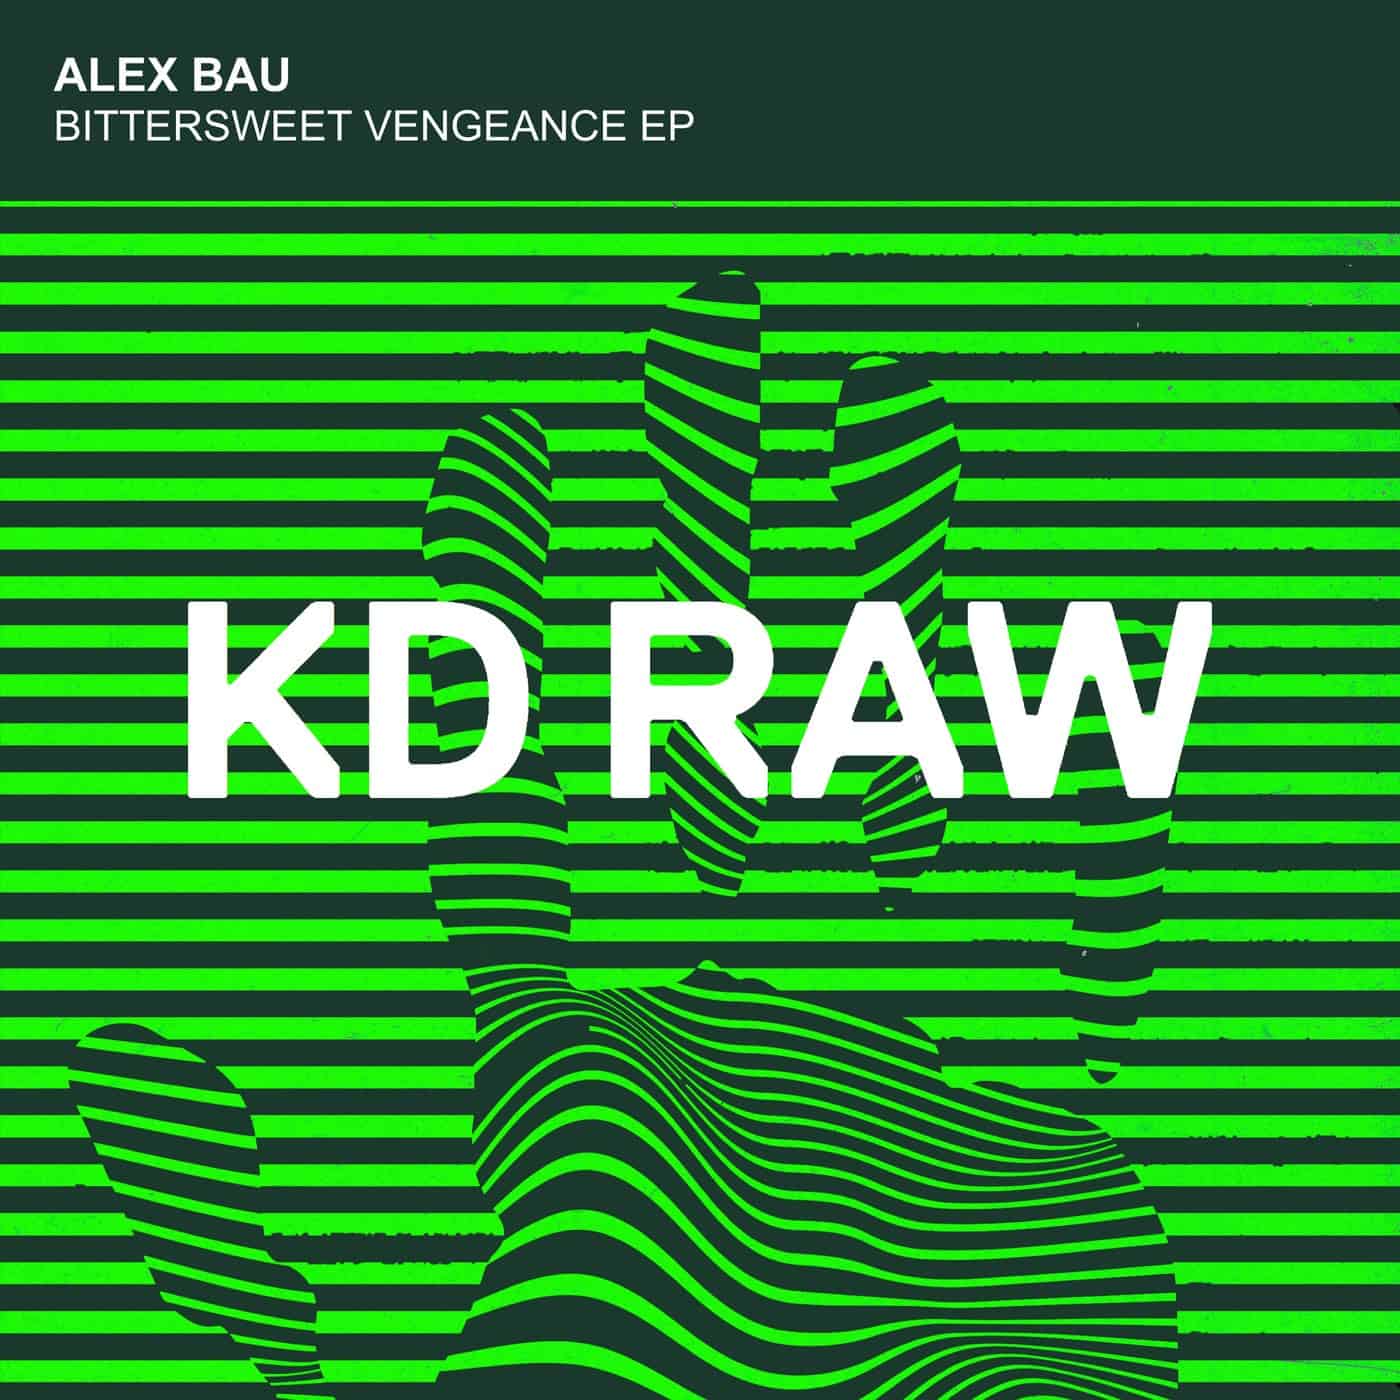 image cover: Bittersweet Vengeance EP by Alex Bau on KD RAW